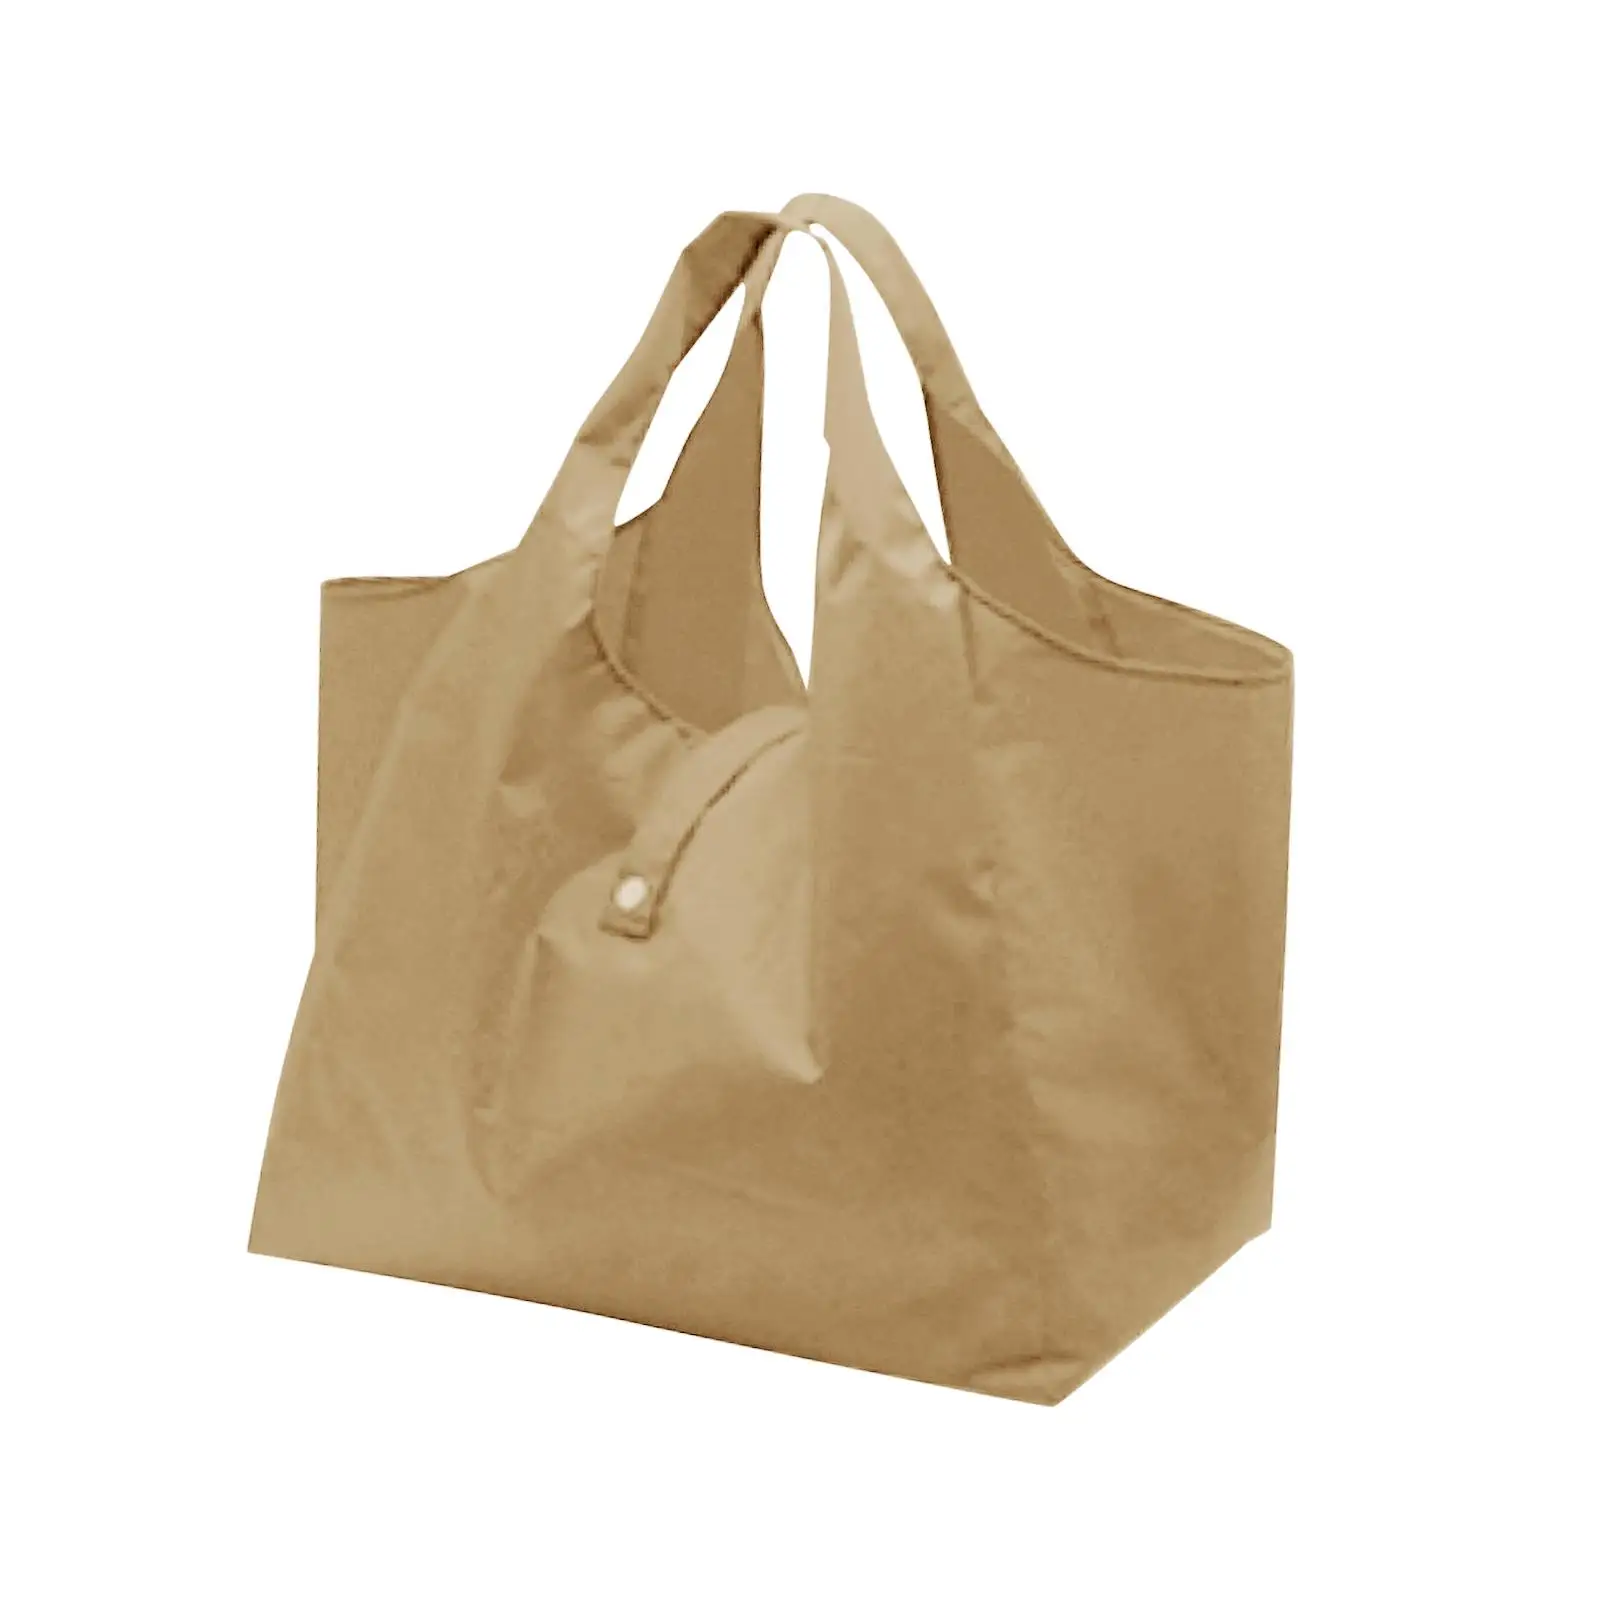 Reusable Shopping Grocery Bag Foldable, Washable, Large Capacity, Heavy Duty Tote, Eco Friendly Purse Bag Fits in Pocket